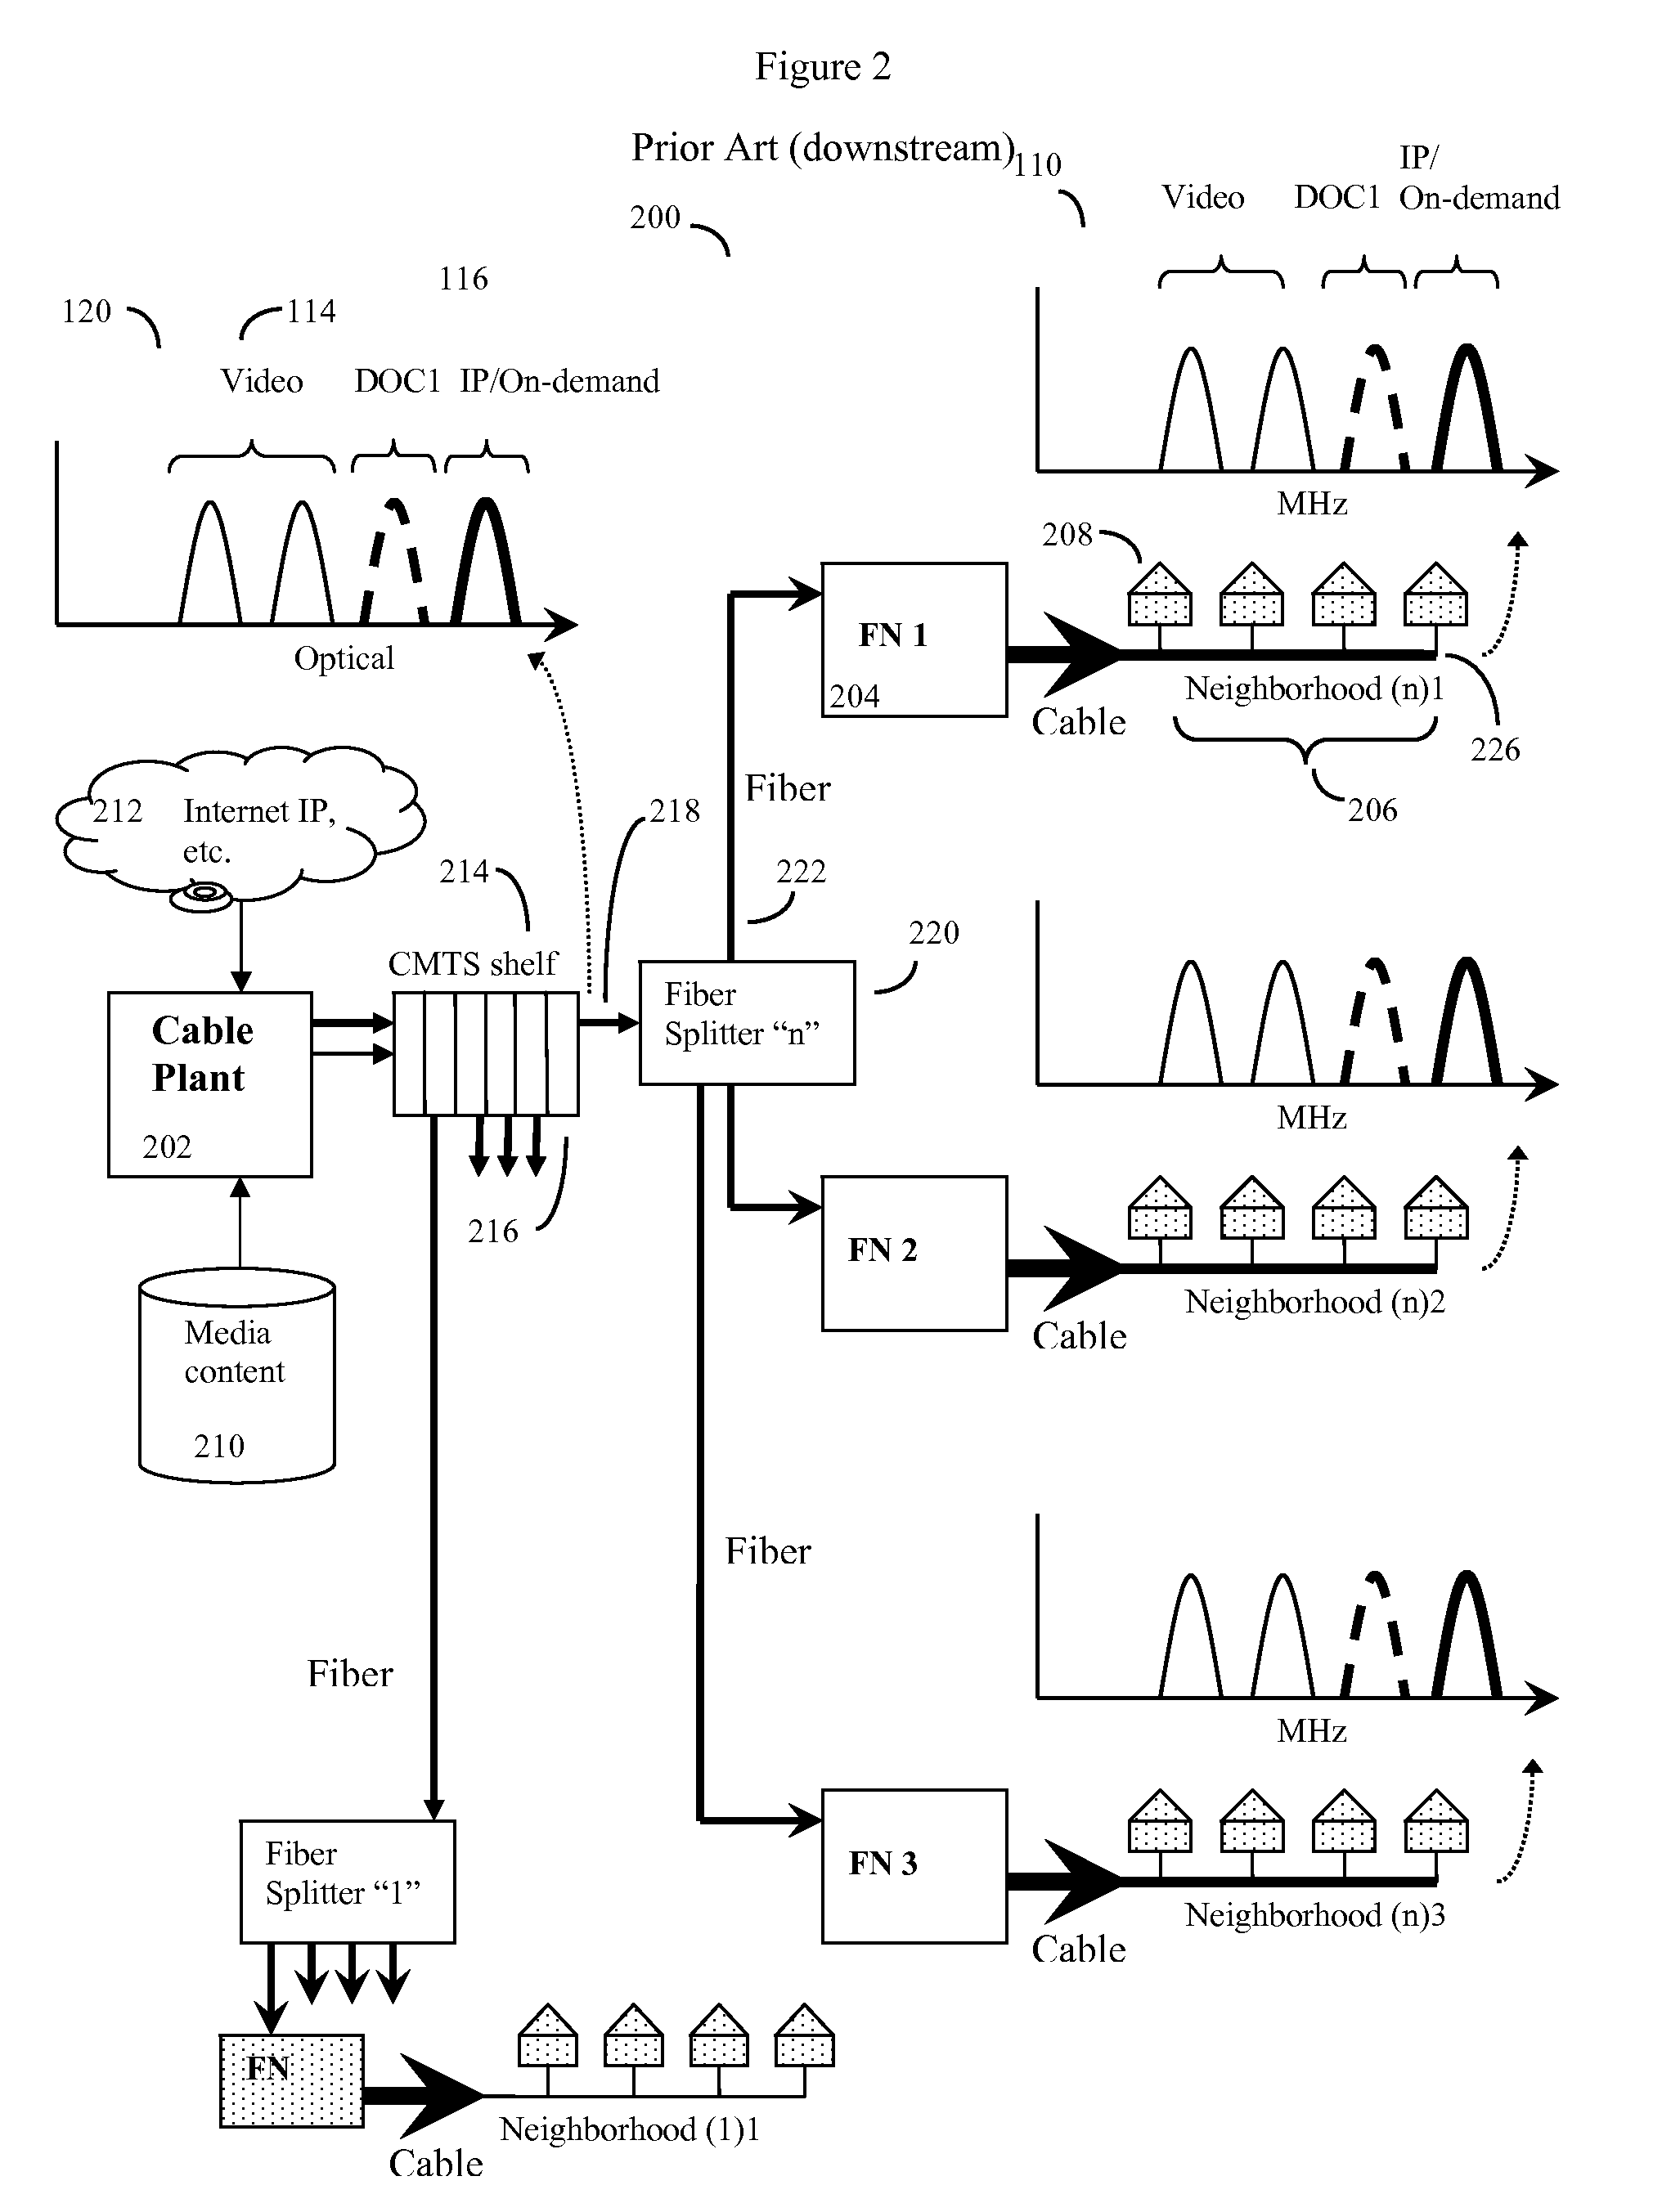 Distributed cable modem termination system with software reconfigurable MAC and PHY capability